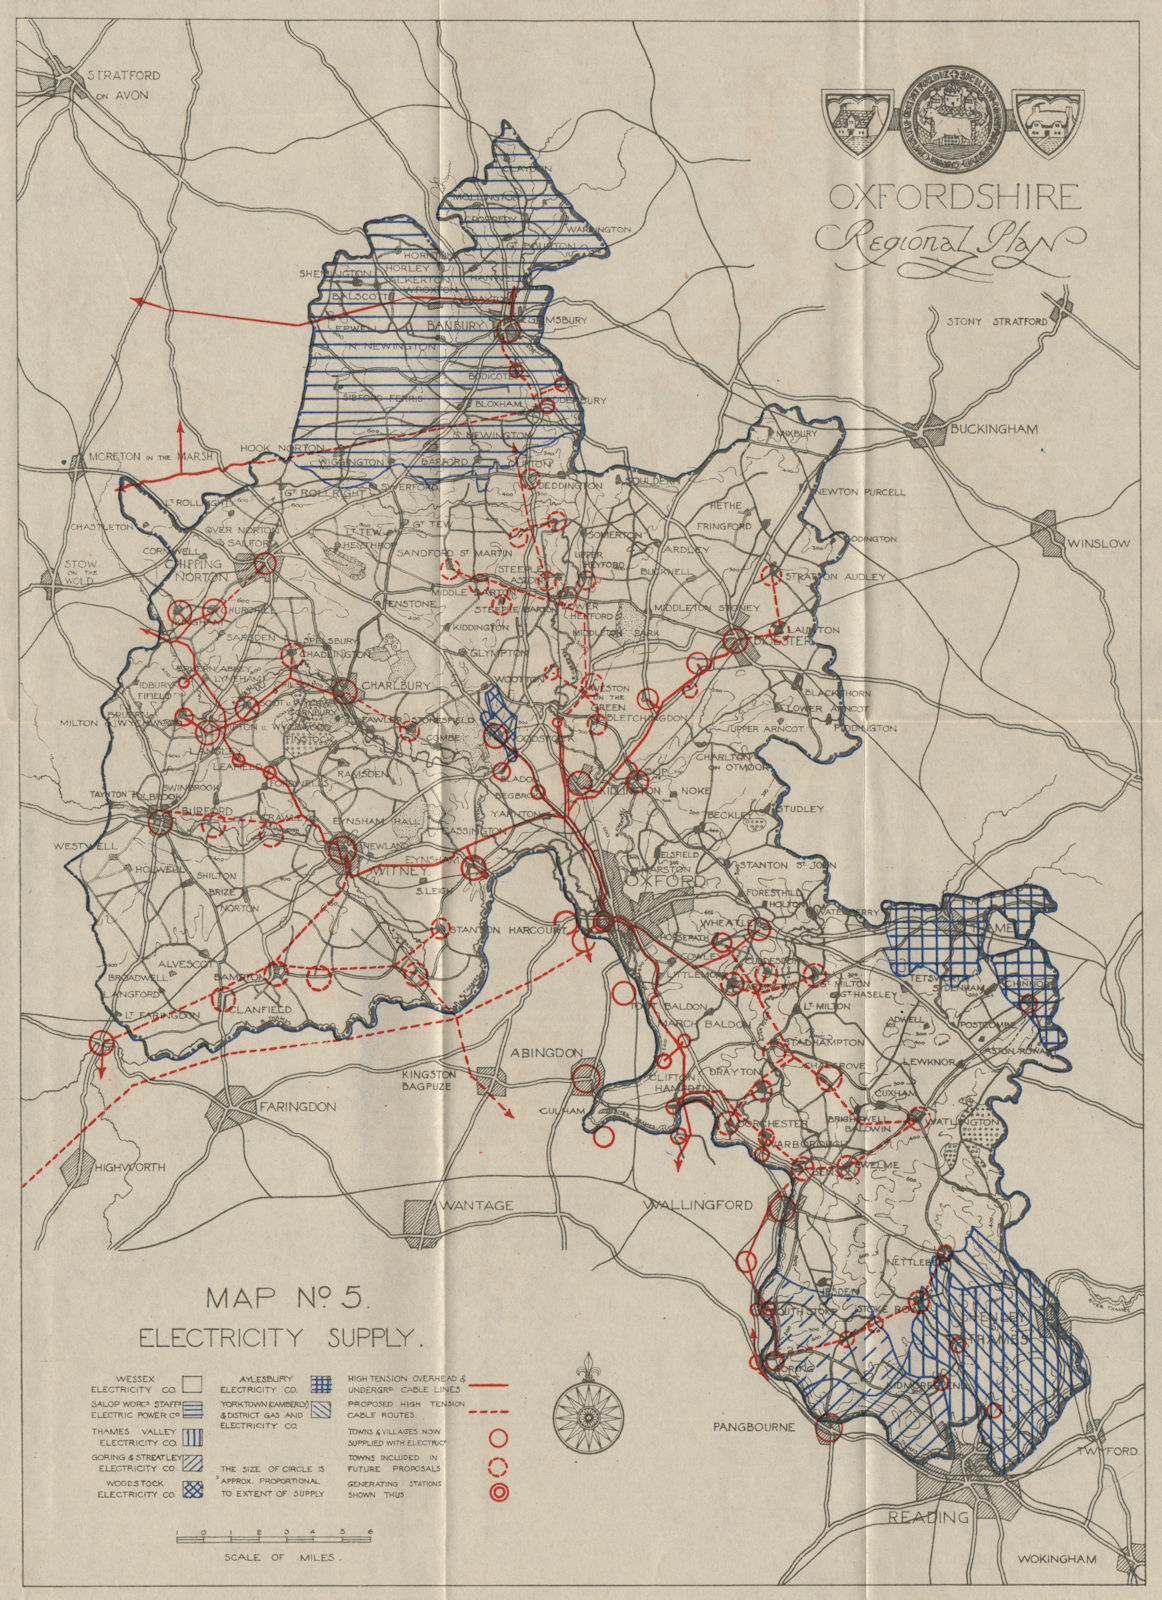 OXFORDSHIRE ELECTRICITY SUPPLY & COMPANIES. Towns supplied & unsupplied 1931 map